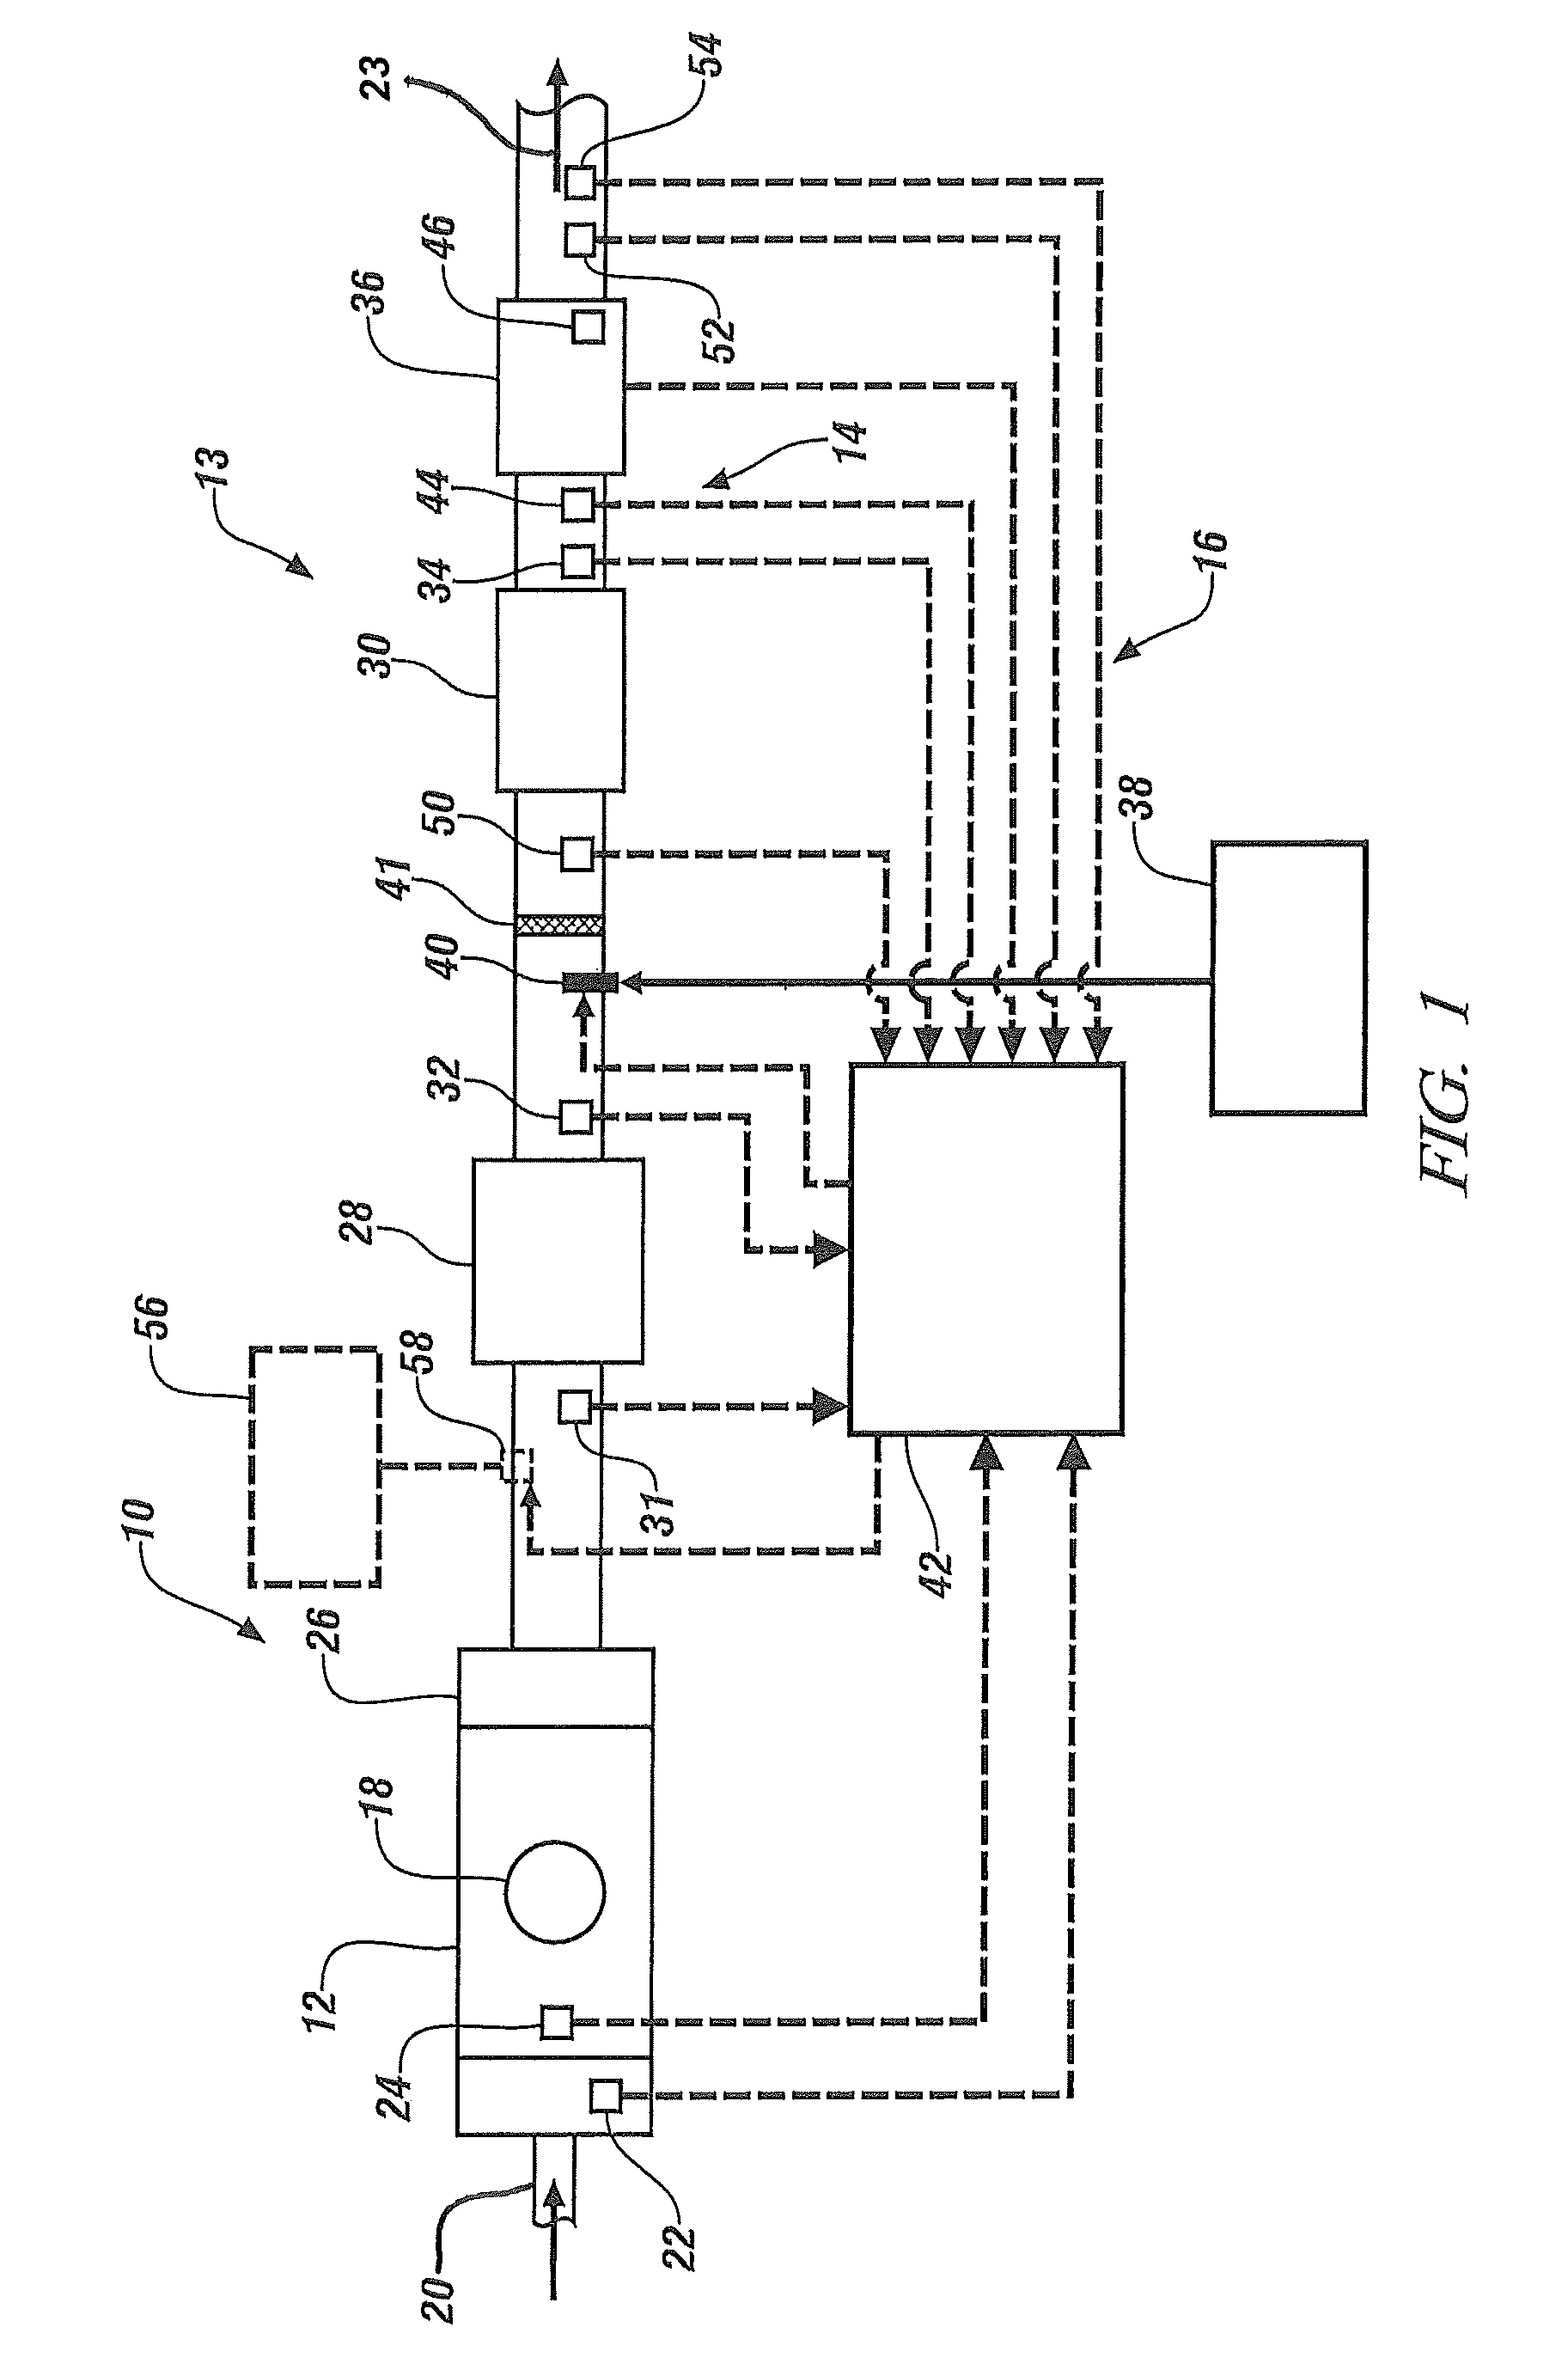 Exhaust diagnostic system and method with SCR NH3 depletion cleansing mode for initial step in the def quality service healing test